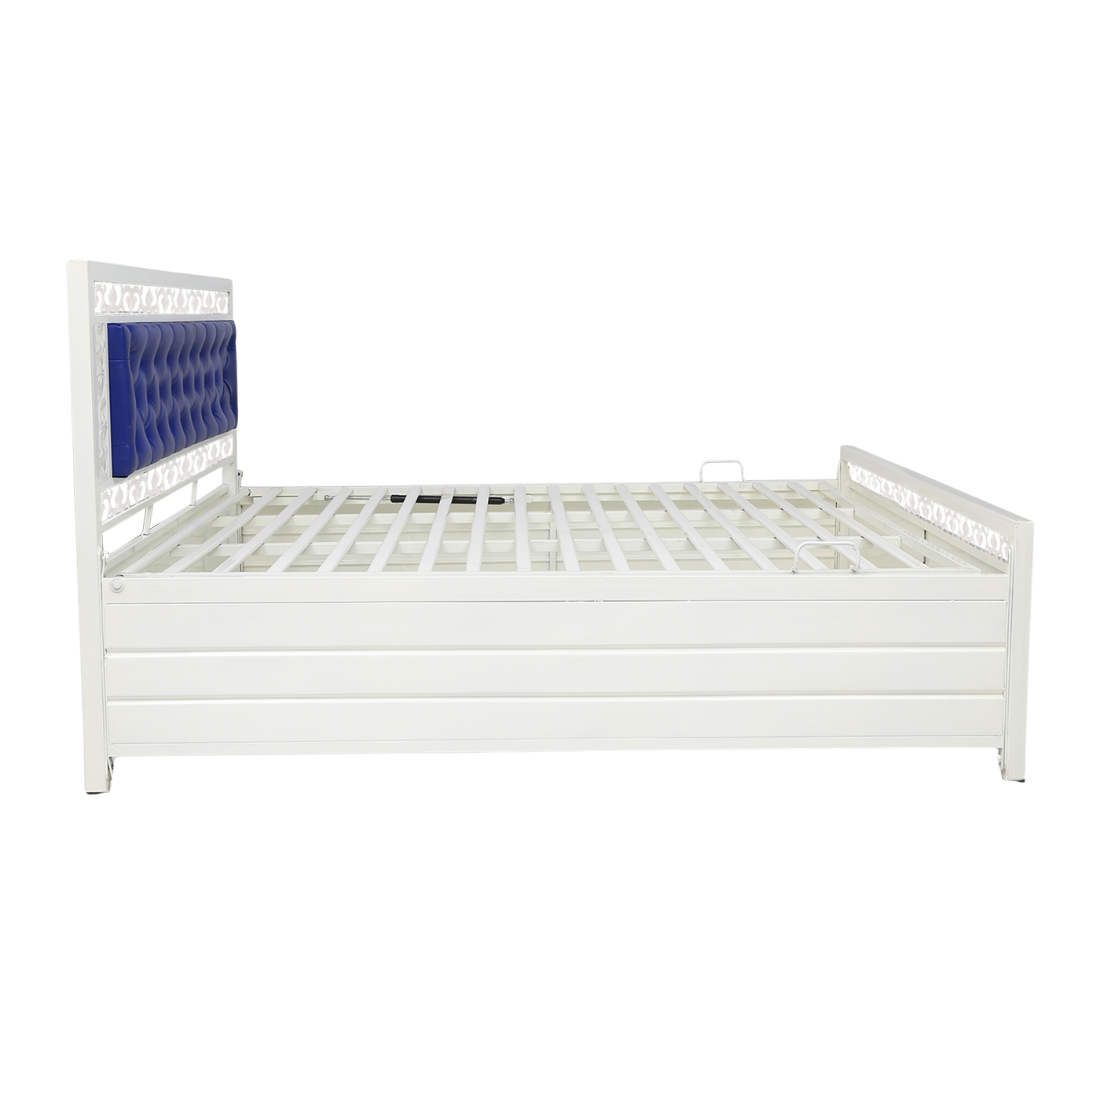 Cuba Hydraulic Storage Single Metal Bed with Blue Cushion Headrest (Color - White)